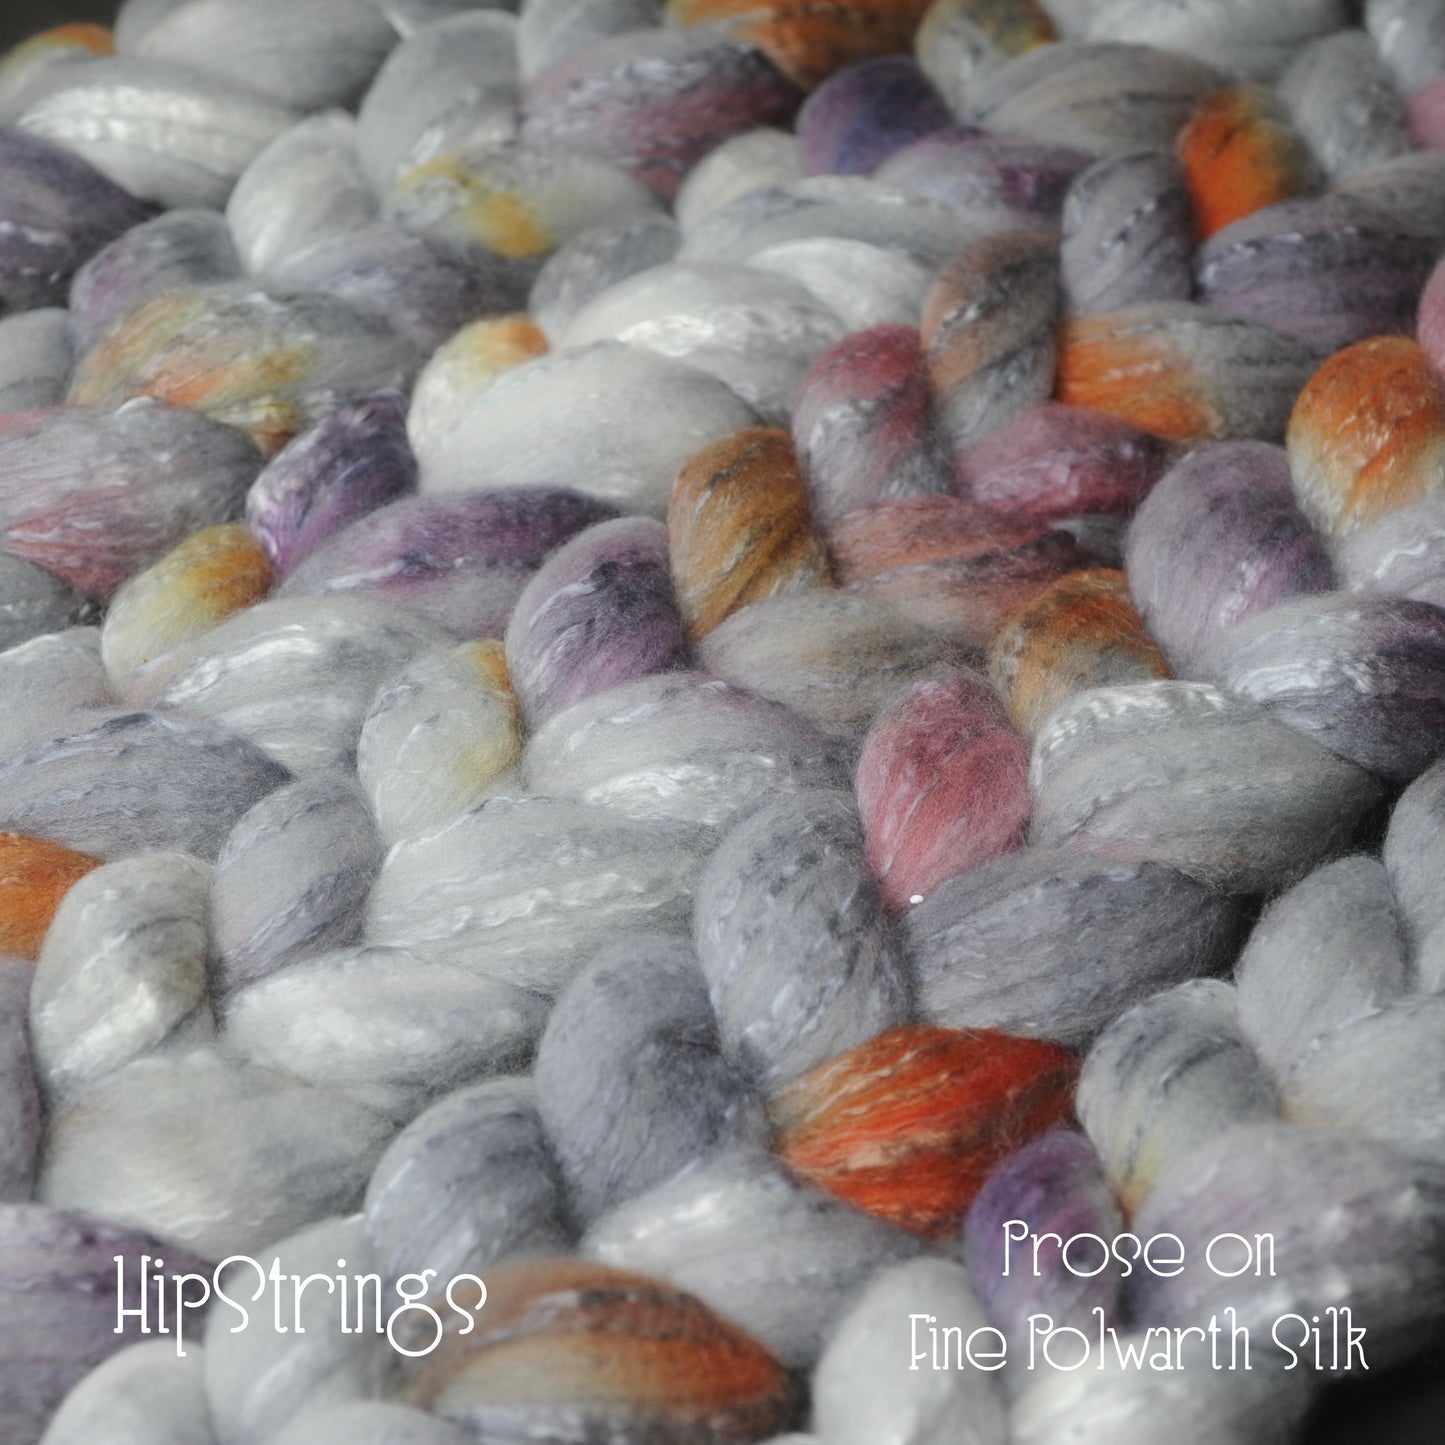 Prose on Hand Dyed Fine Polwarth Silk Combed Top - 4 oz